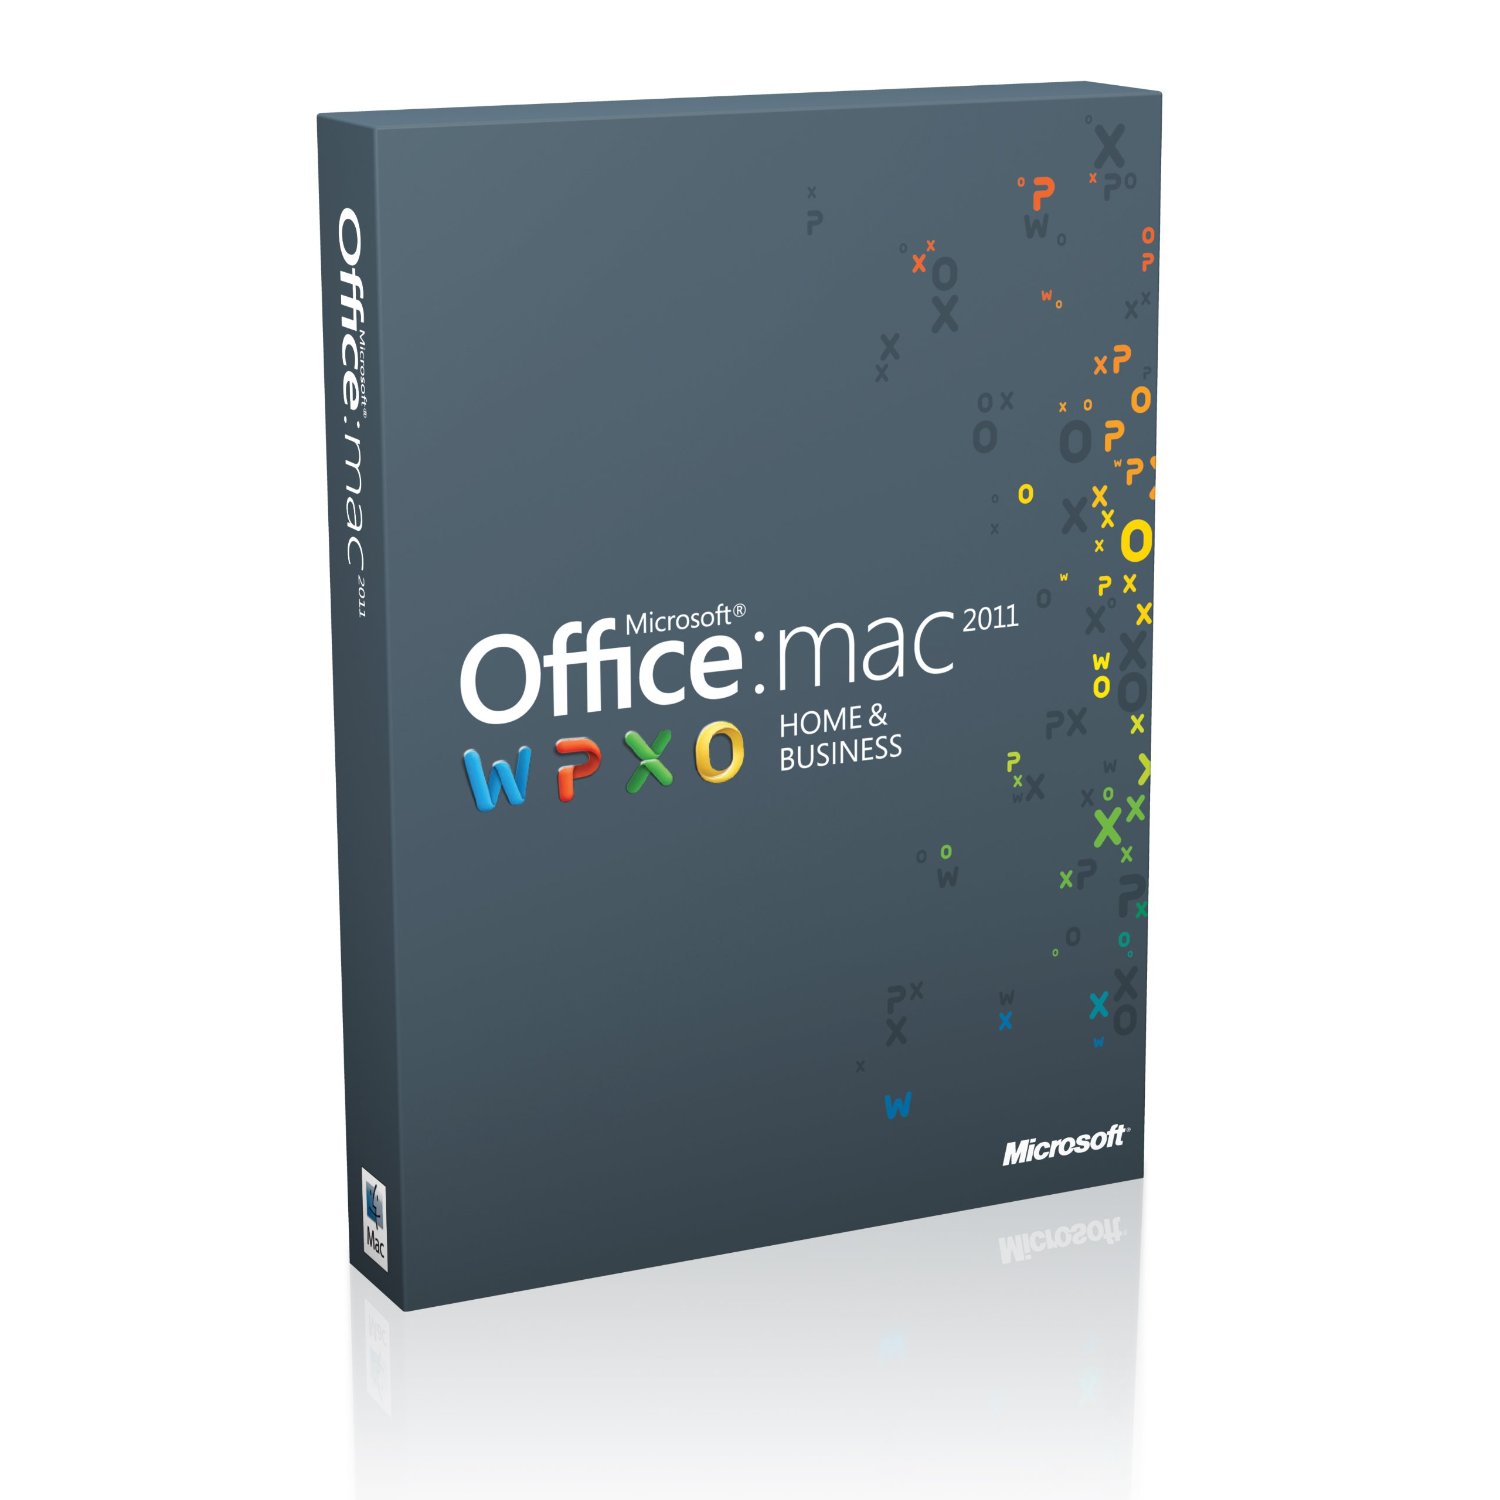 How Long To Download Office Mac 2011